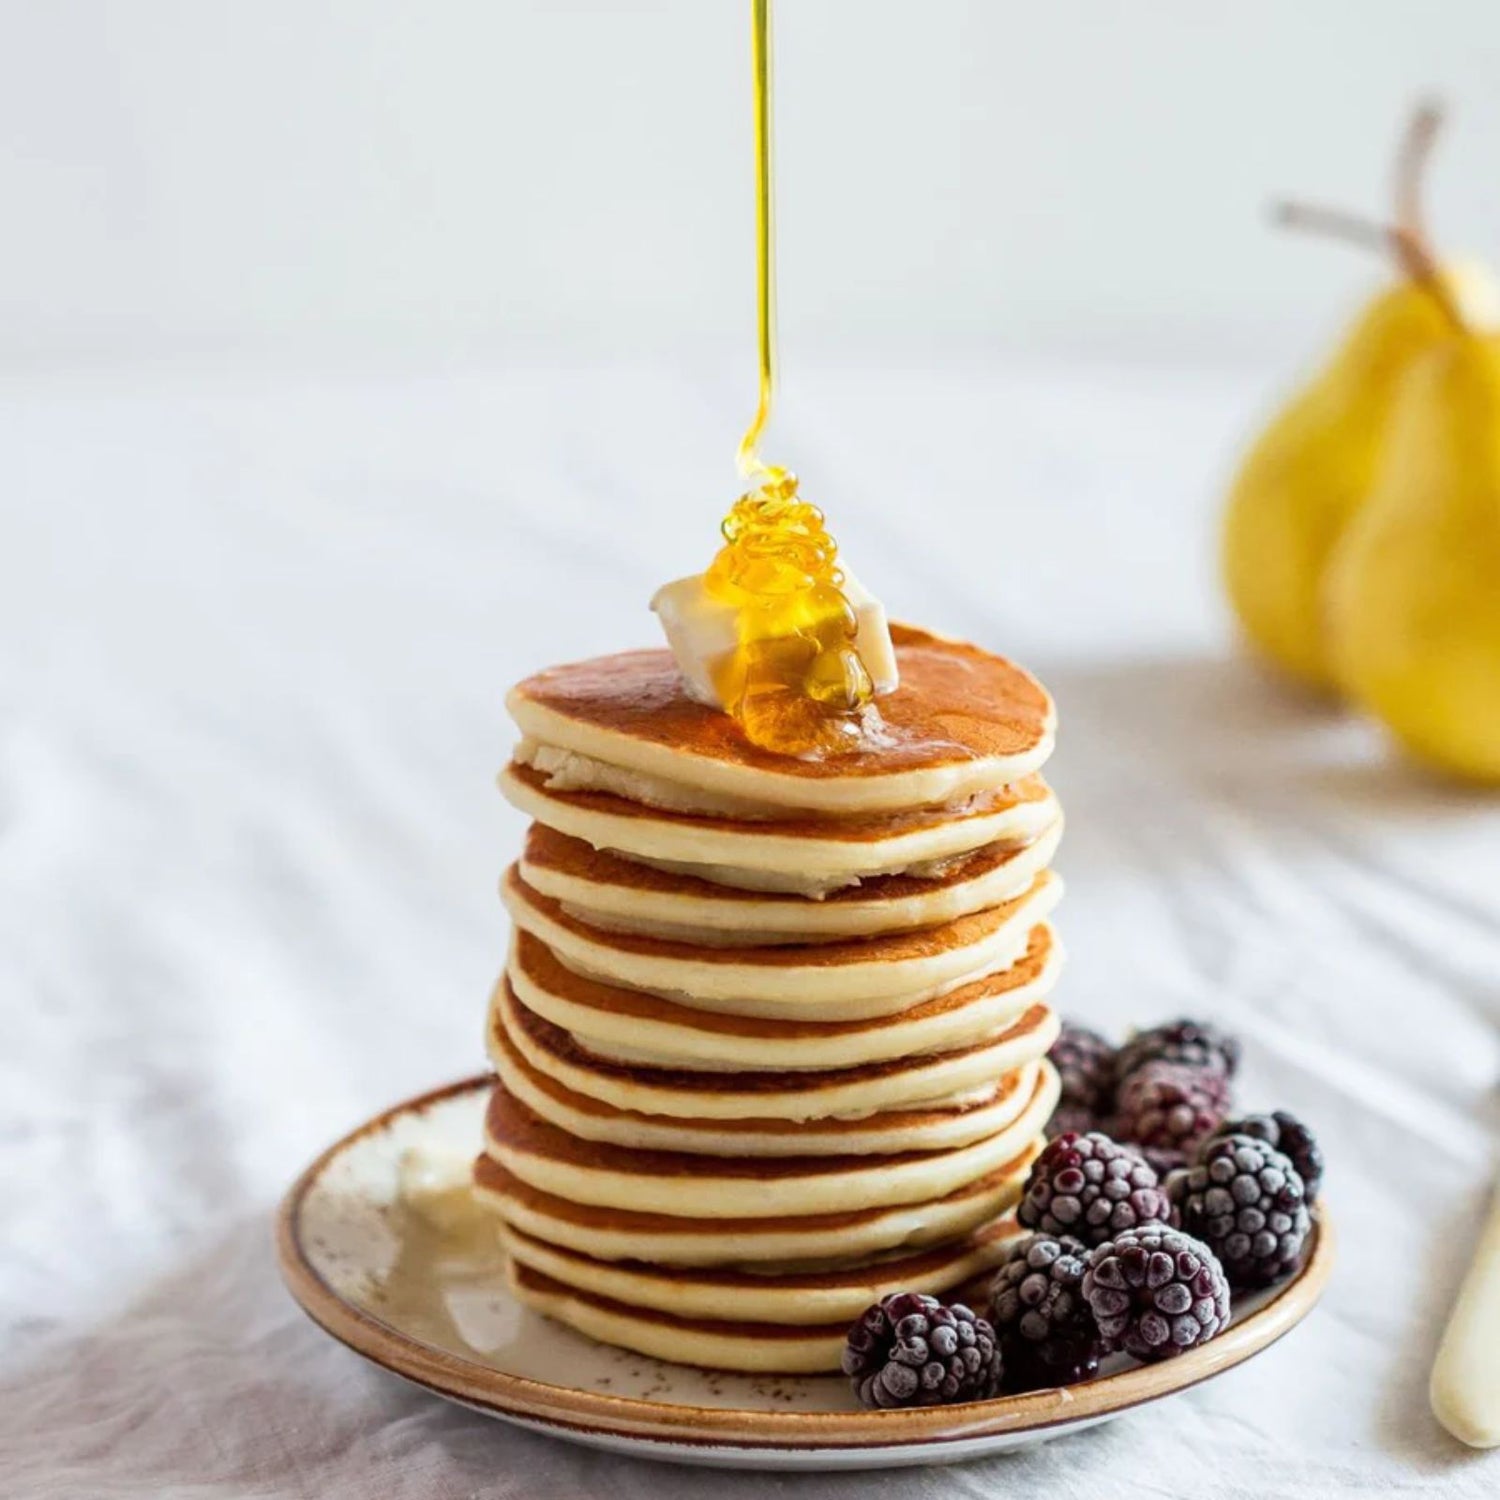 Healthy stack of pancakes on a plate with organic blackberries